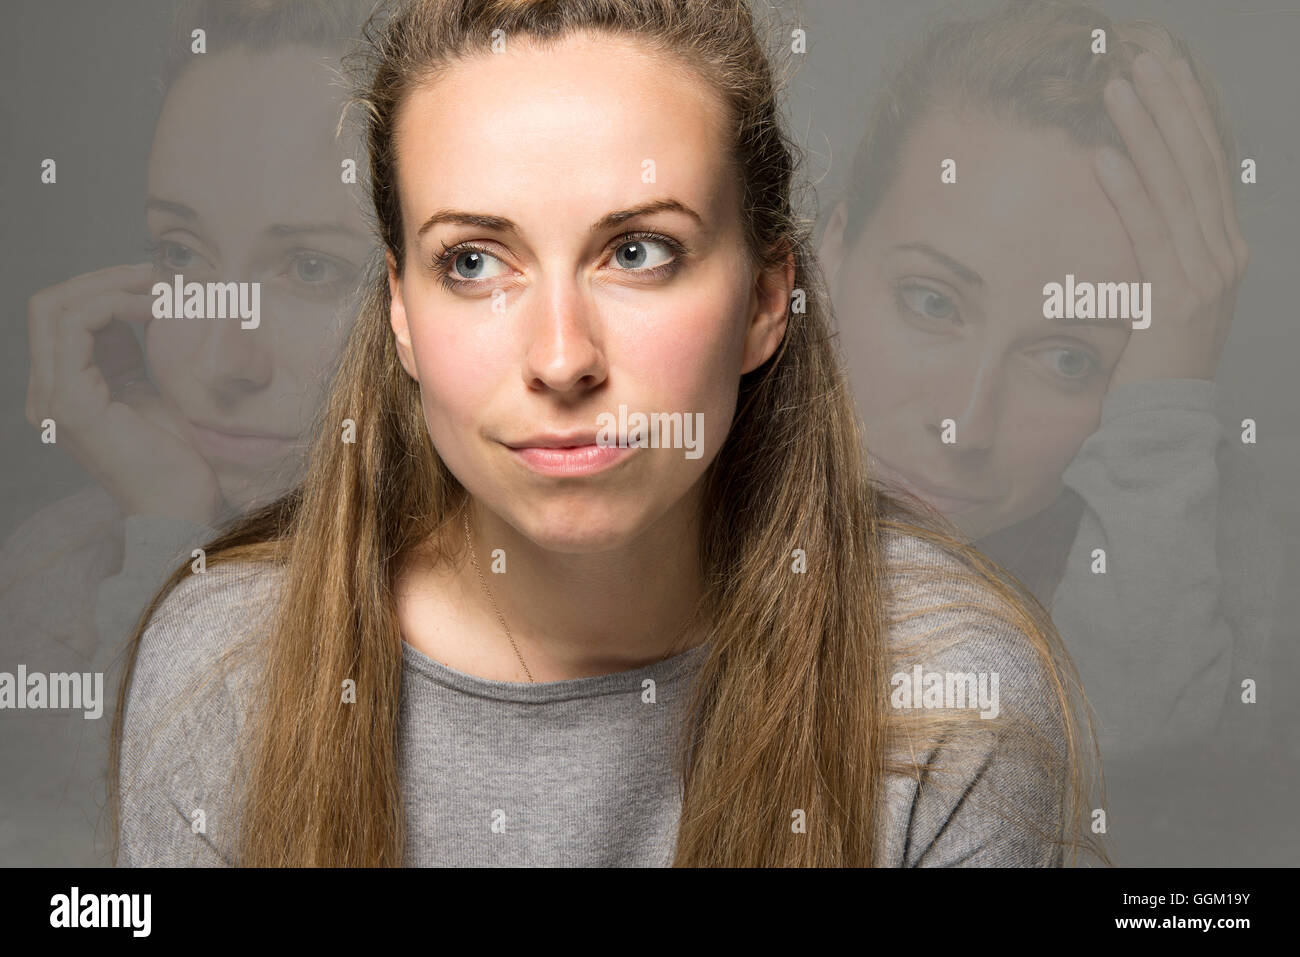 Sad concept young woman with wry smile but hiding tears and sadness in images behind Stock Photo